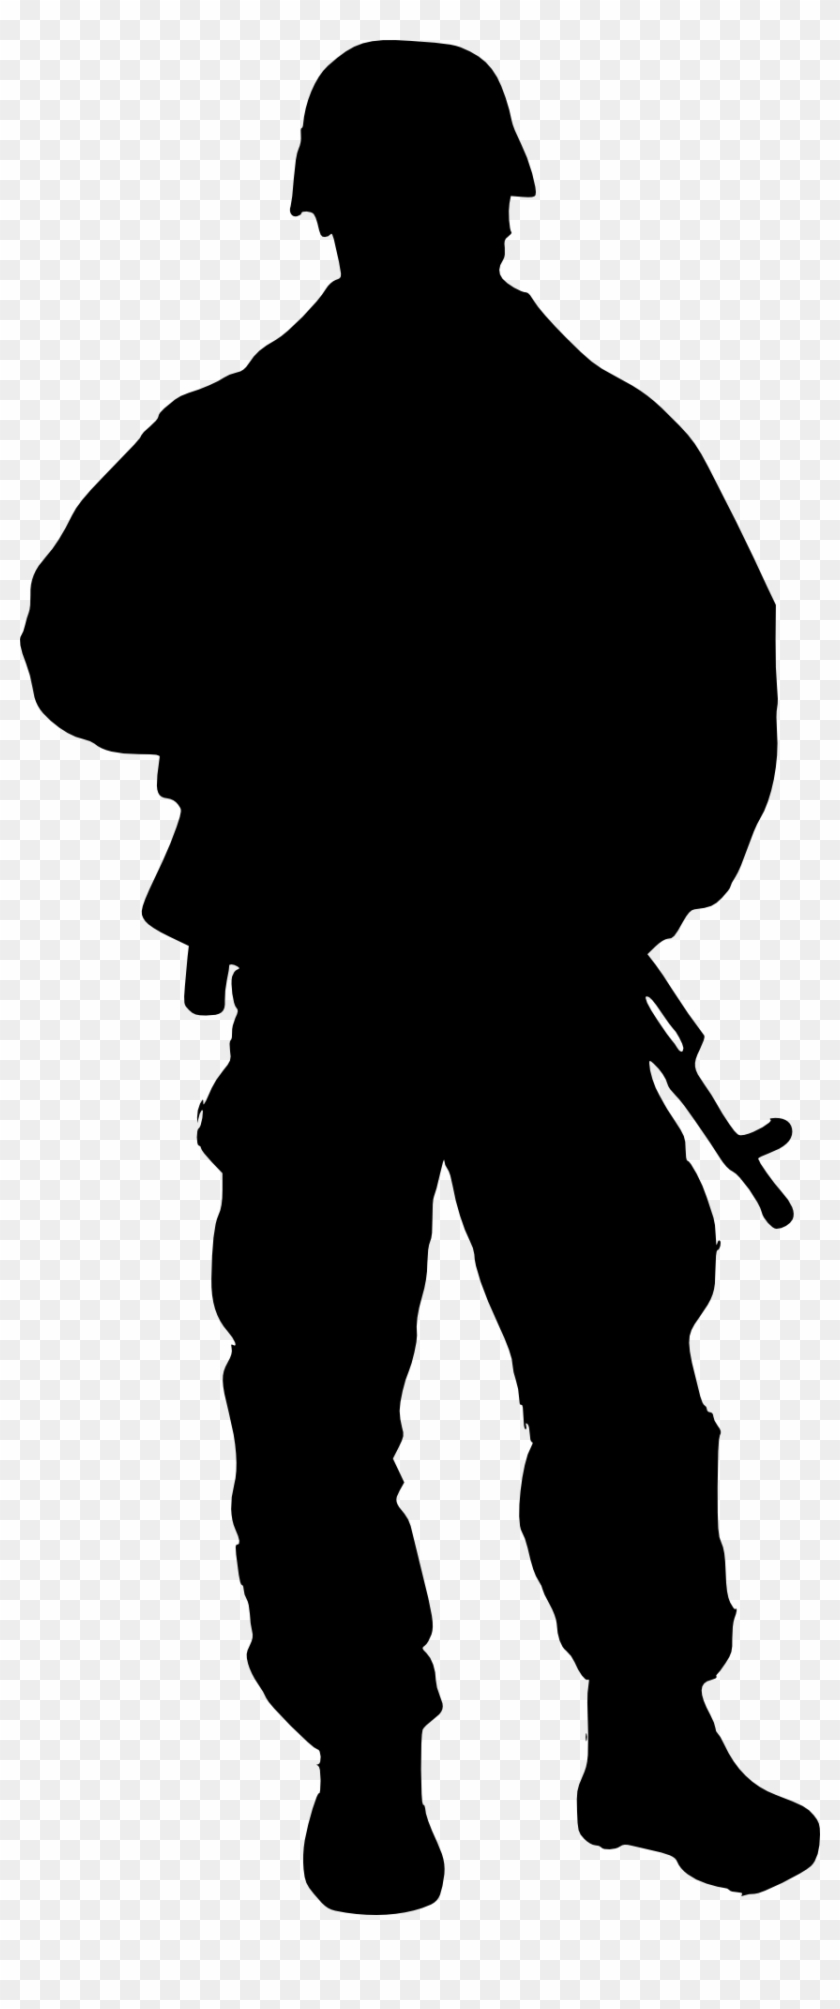 Silhouette Of A Soldier - Slutty Cowgirl Silhouette Png #397747